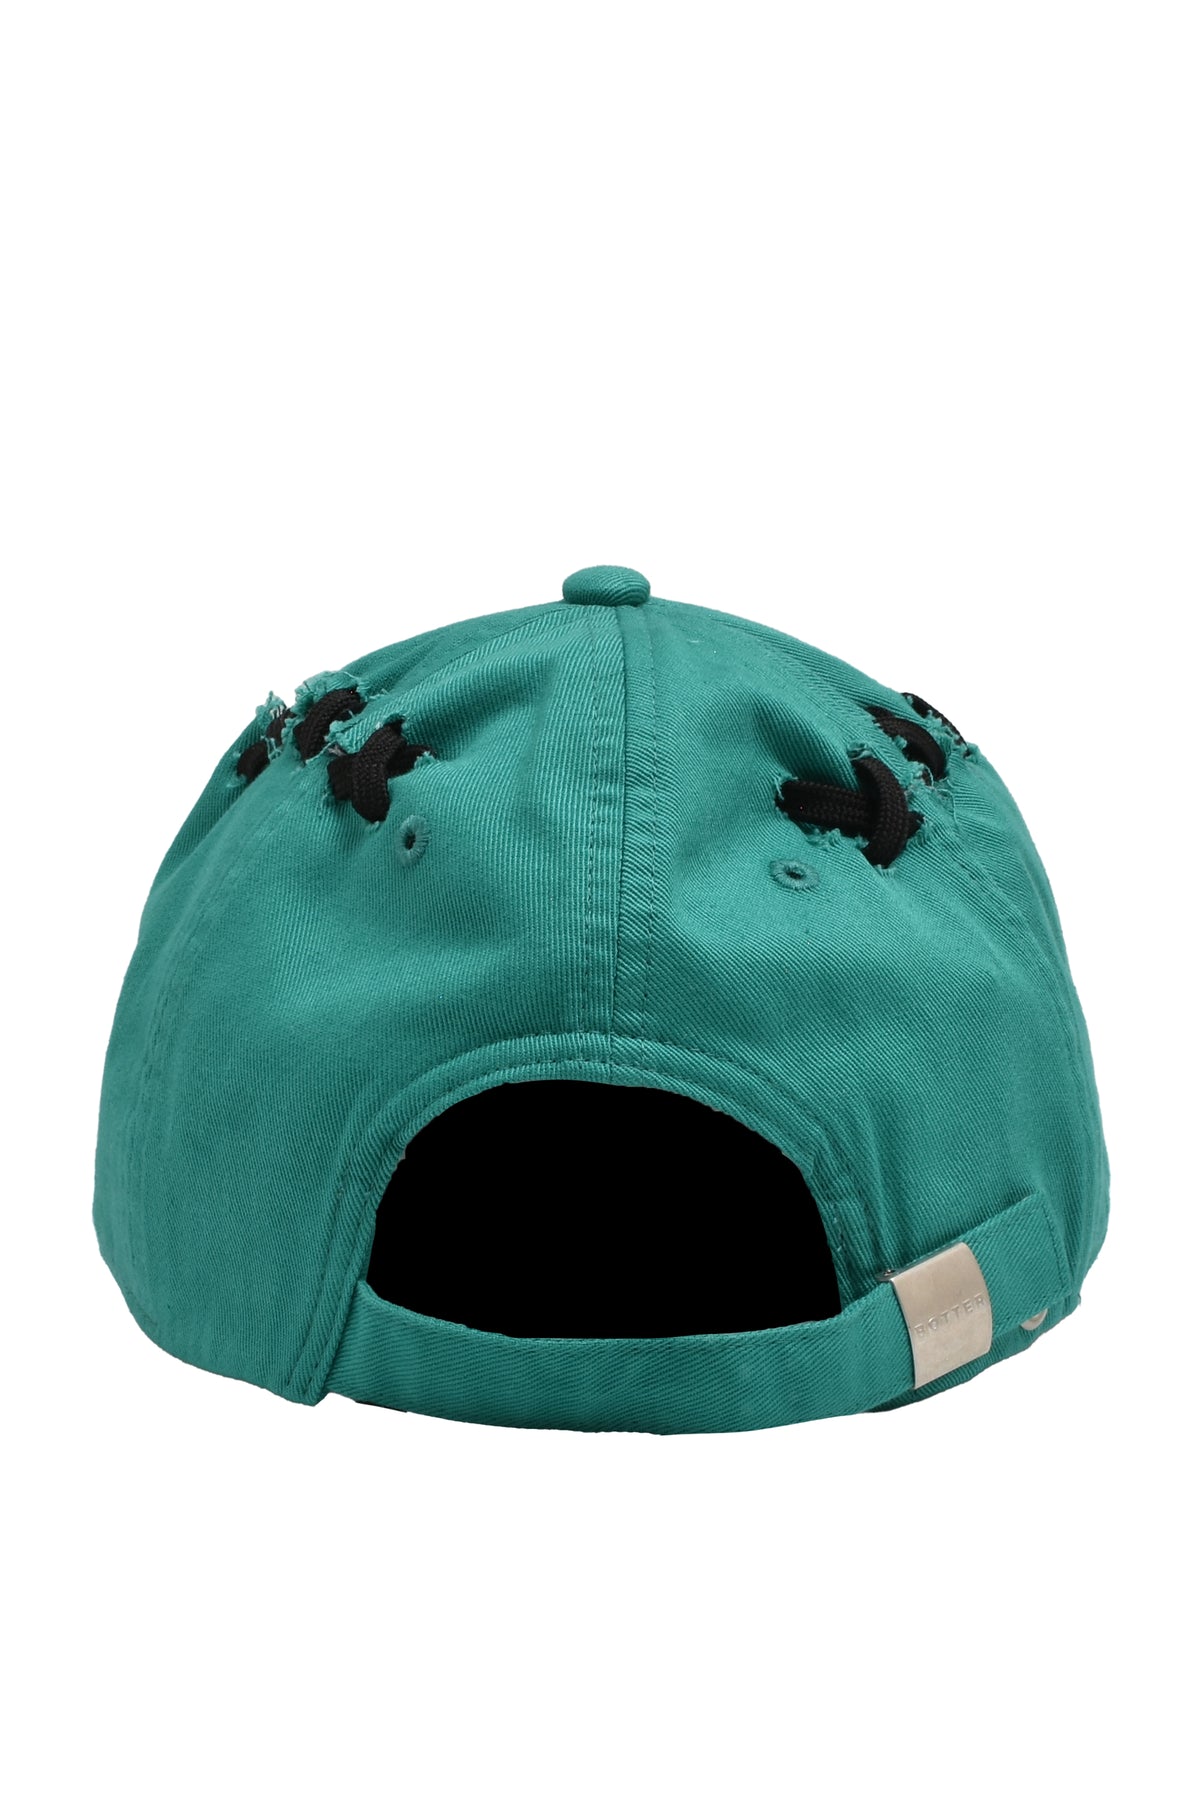 CLASSIC CAP WITH STITCHES / GRN